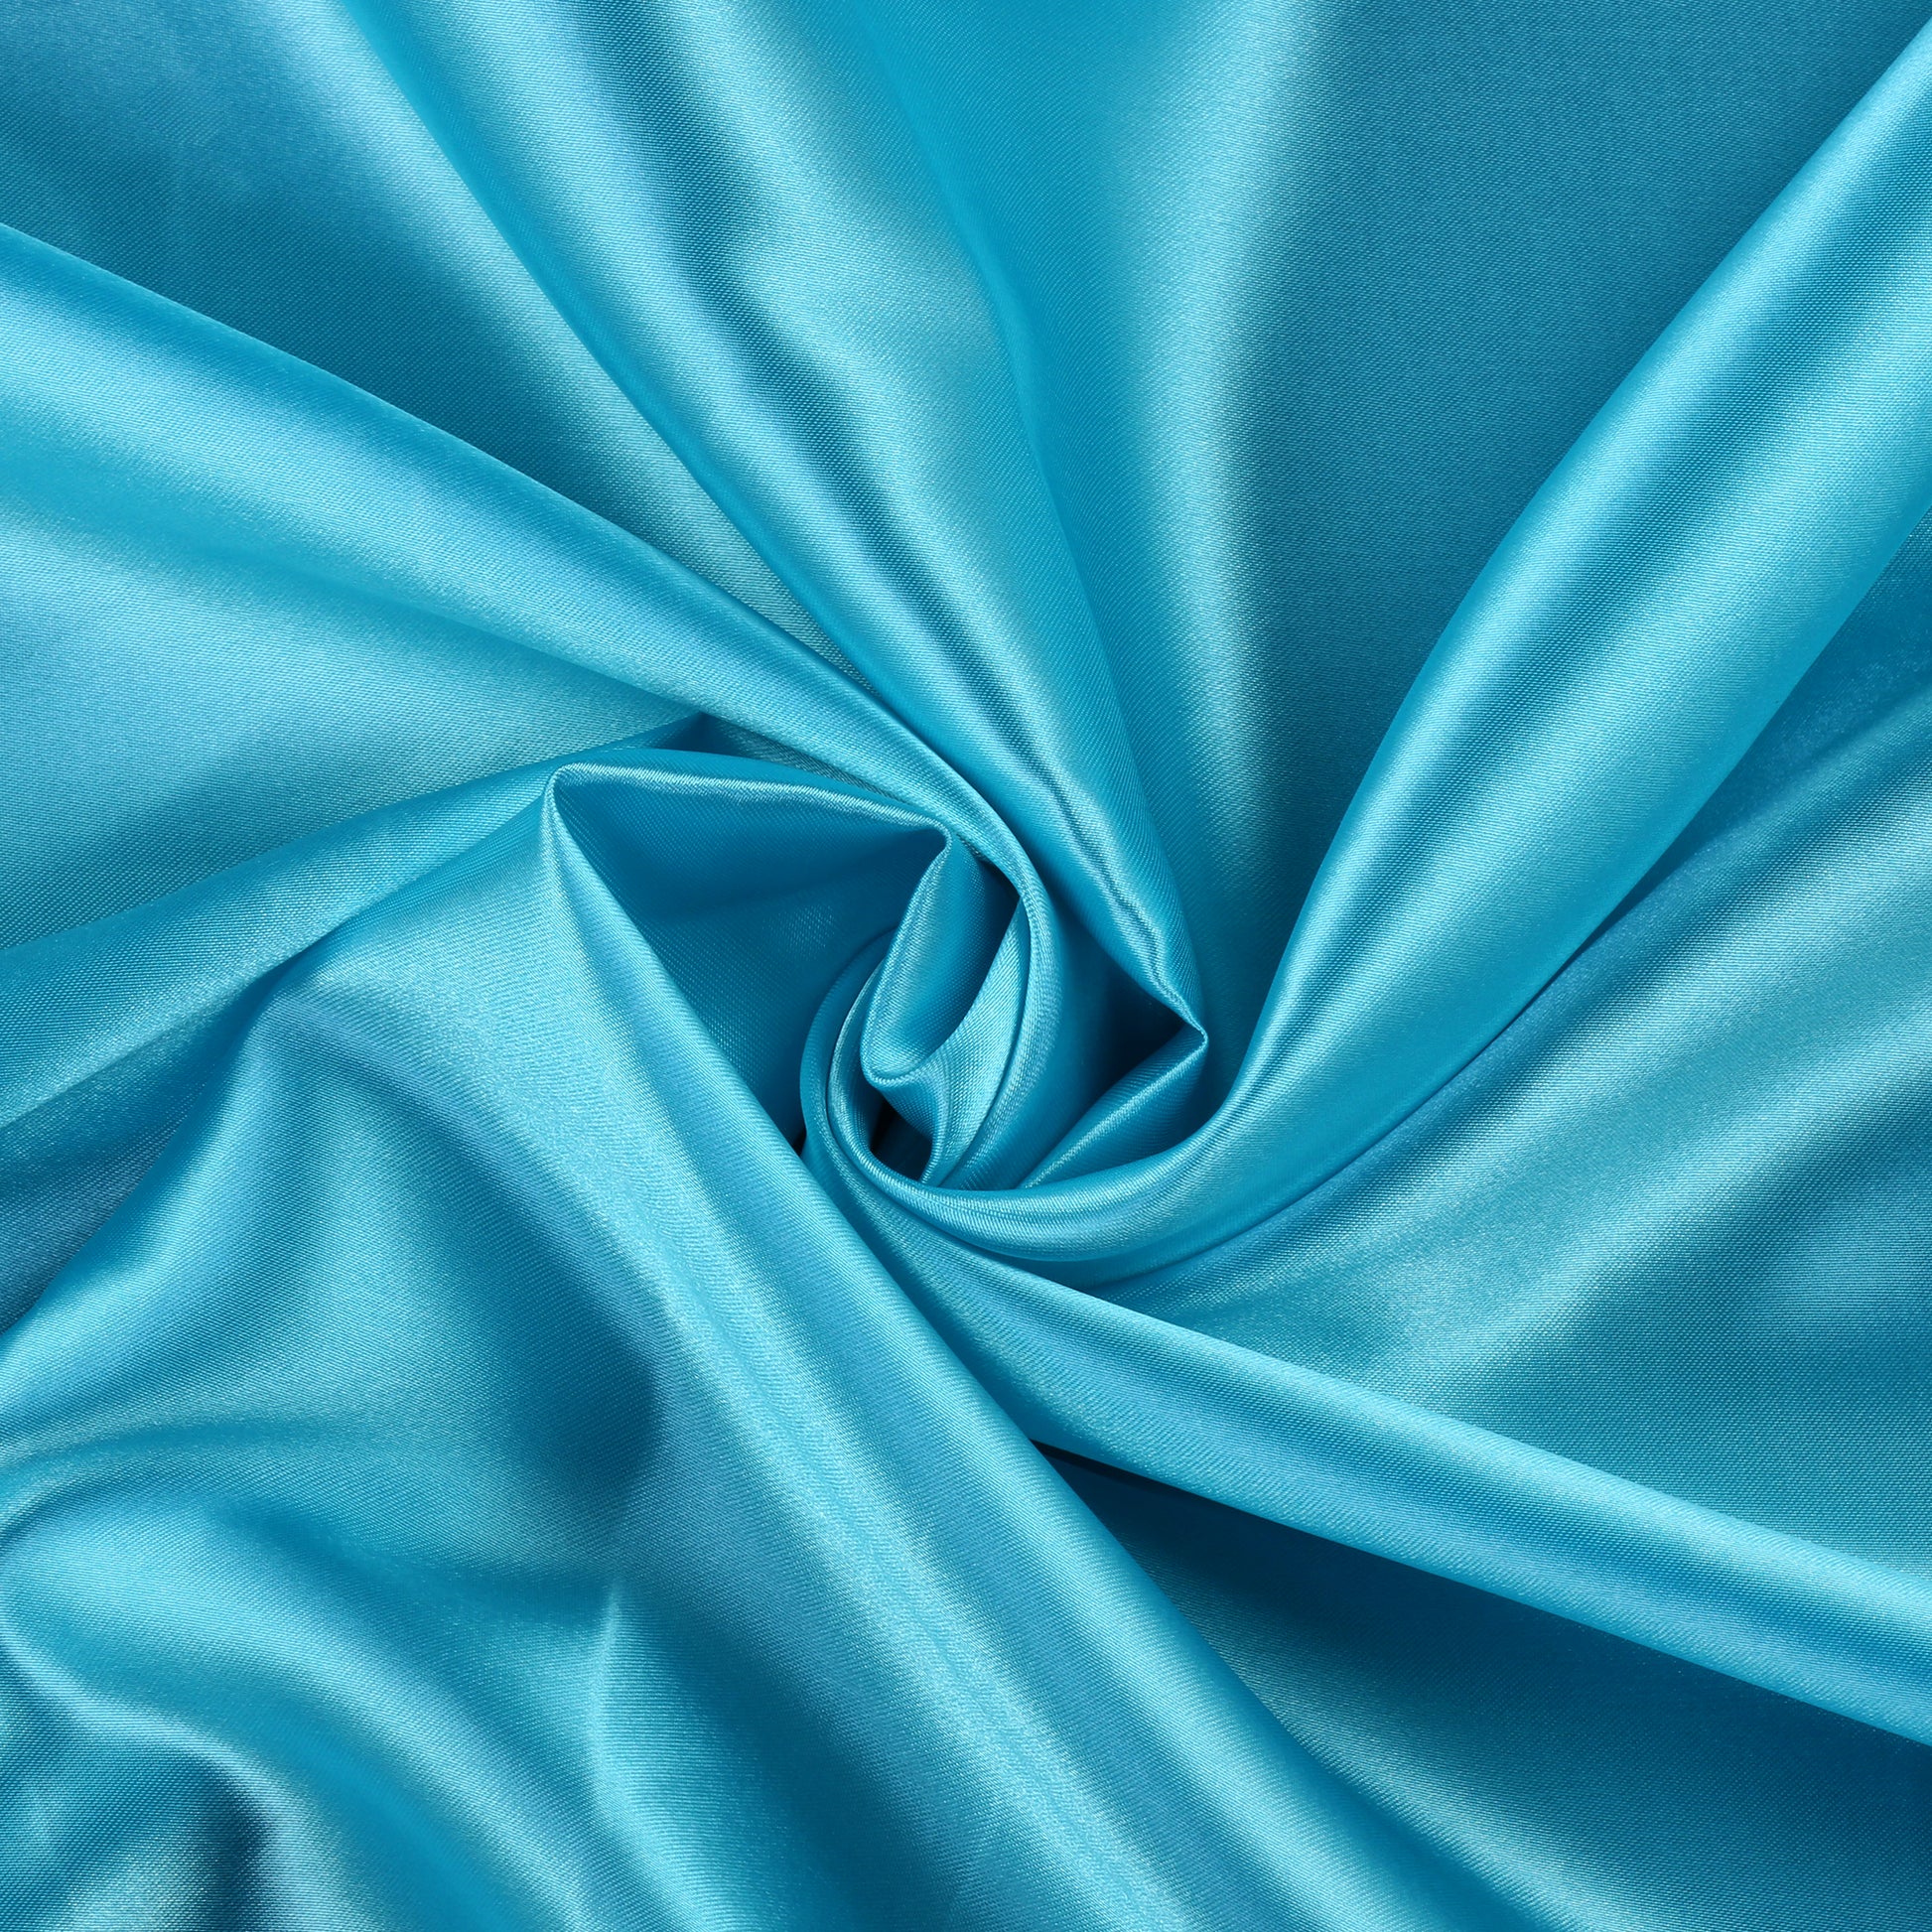 Turquoise,c7d688c1-0578-47d7-abf0-57746891ee61